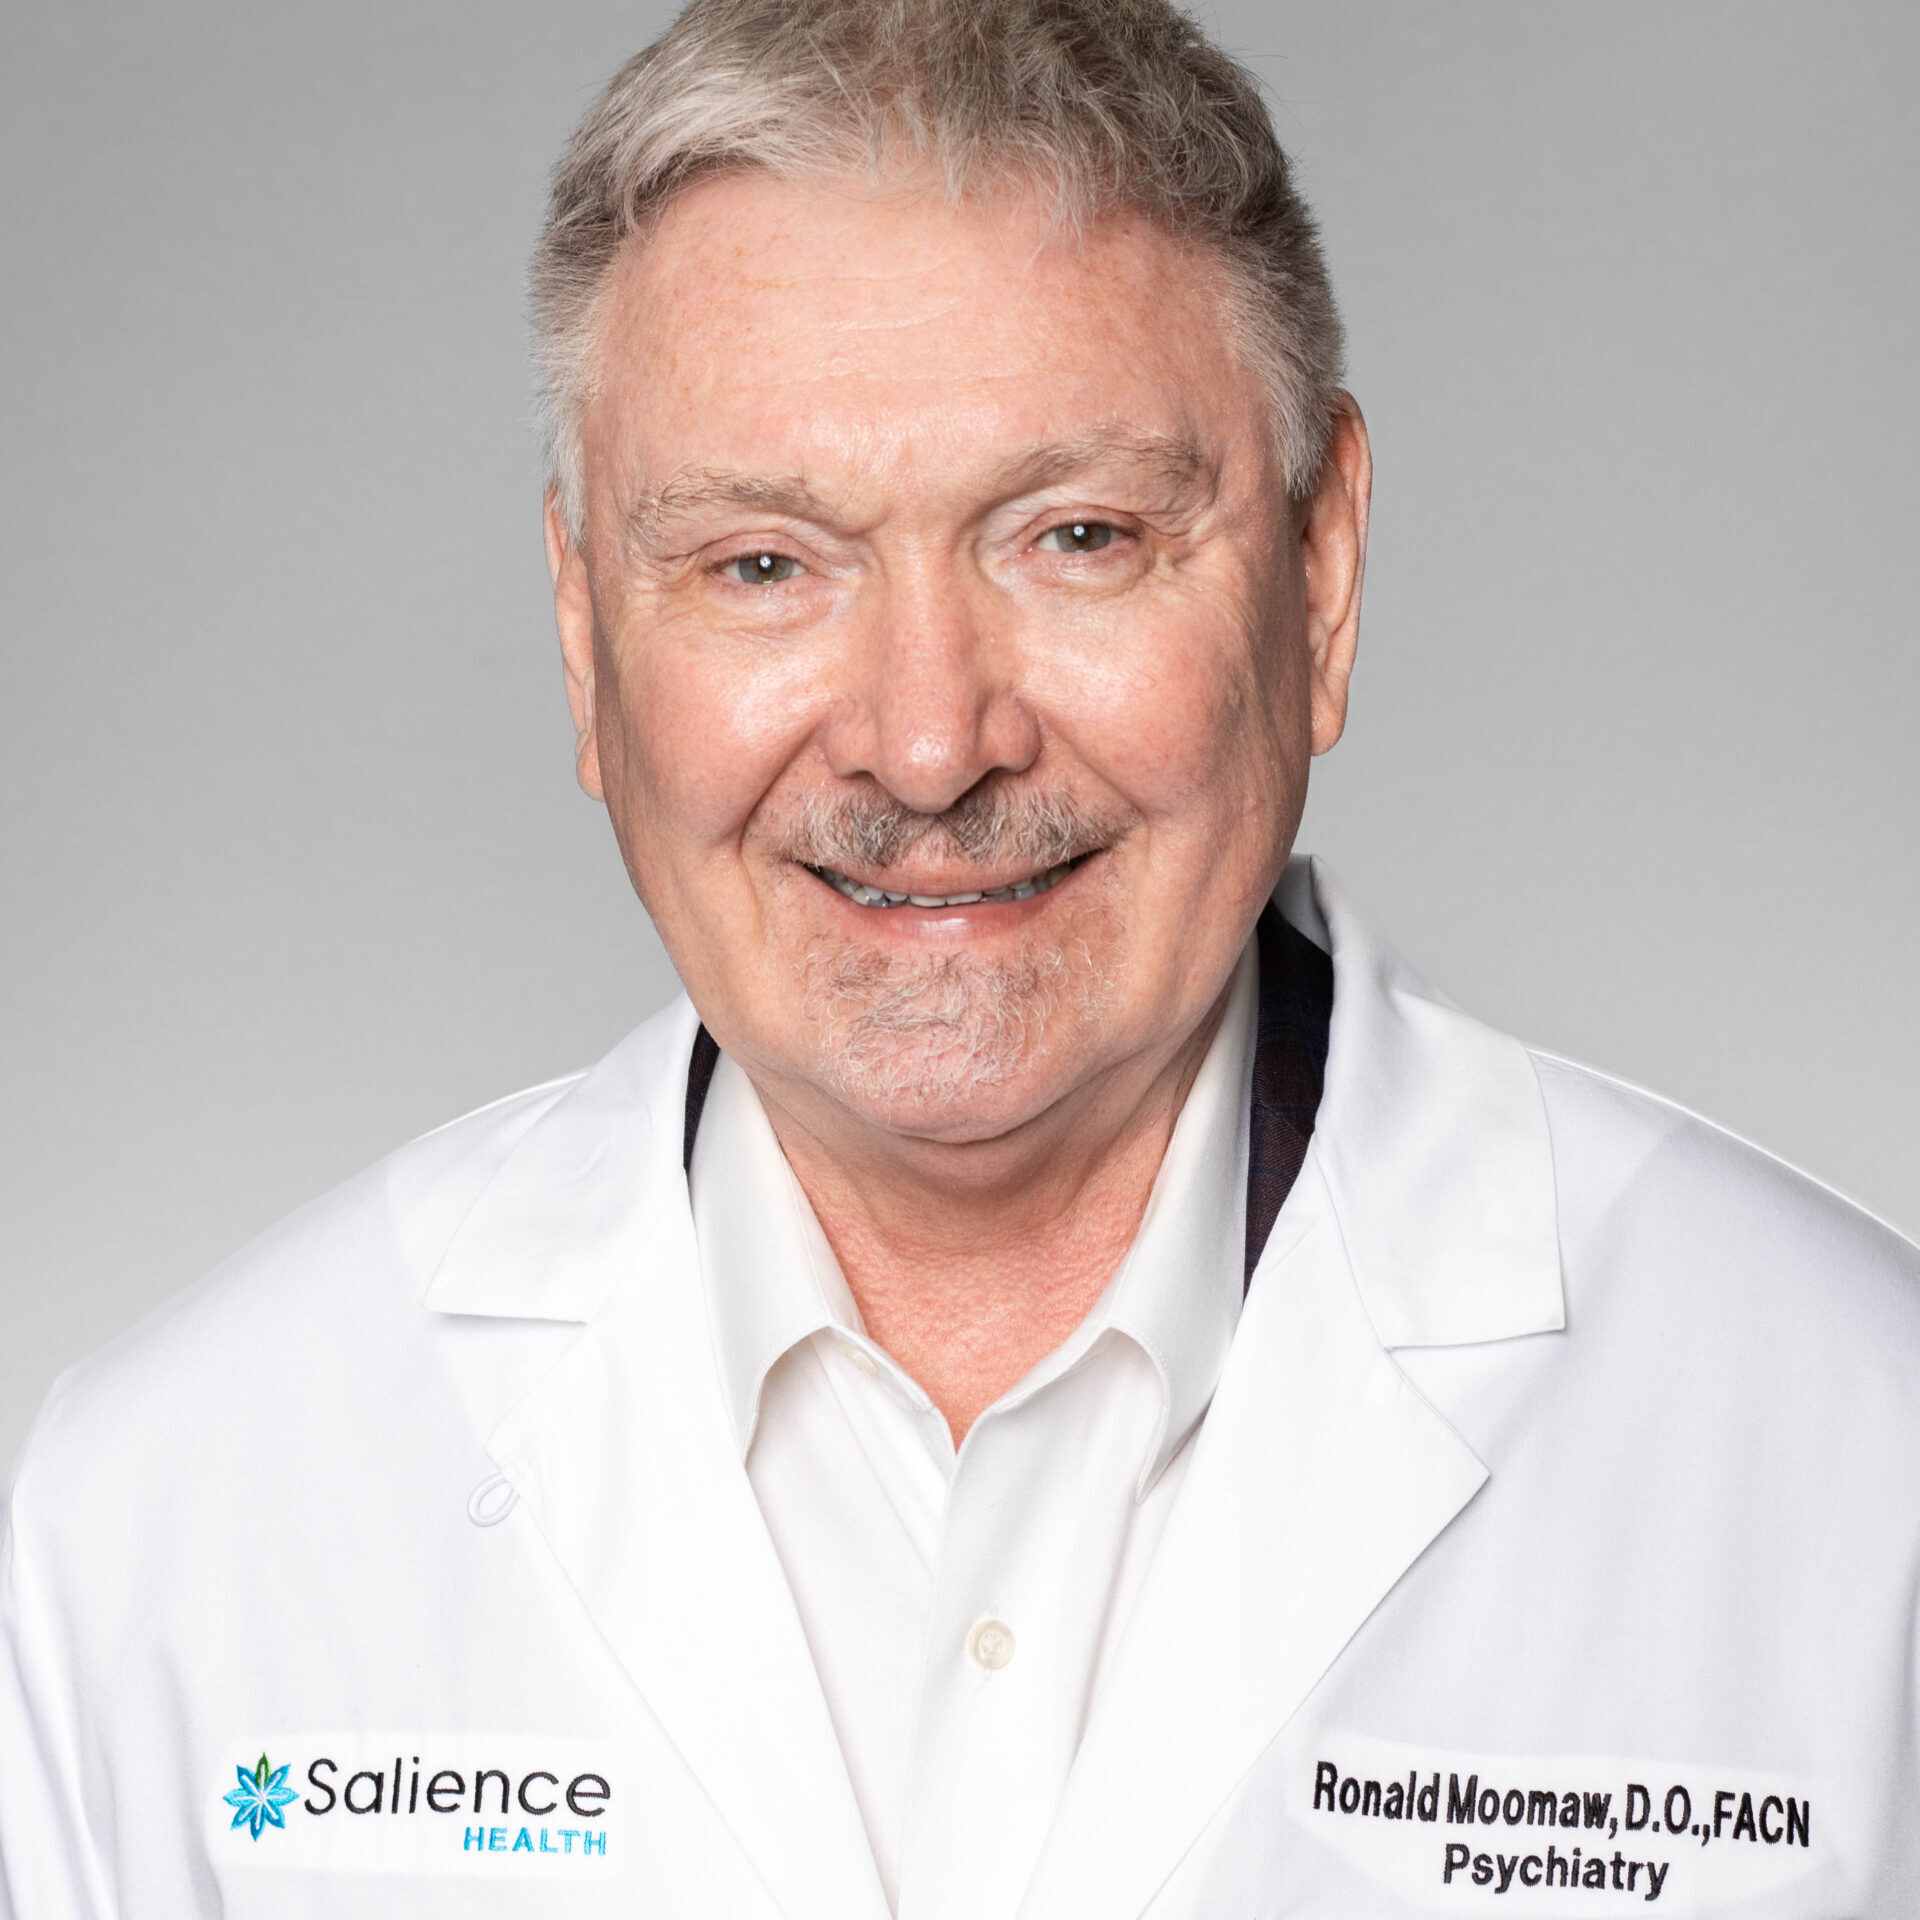 Dr. Ronald Moomaw - Adult Psychiatrist in Plano TX at Salience Health